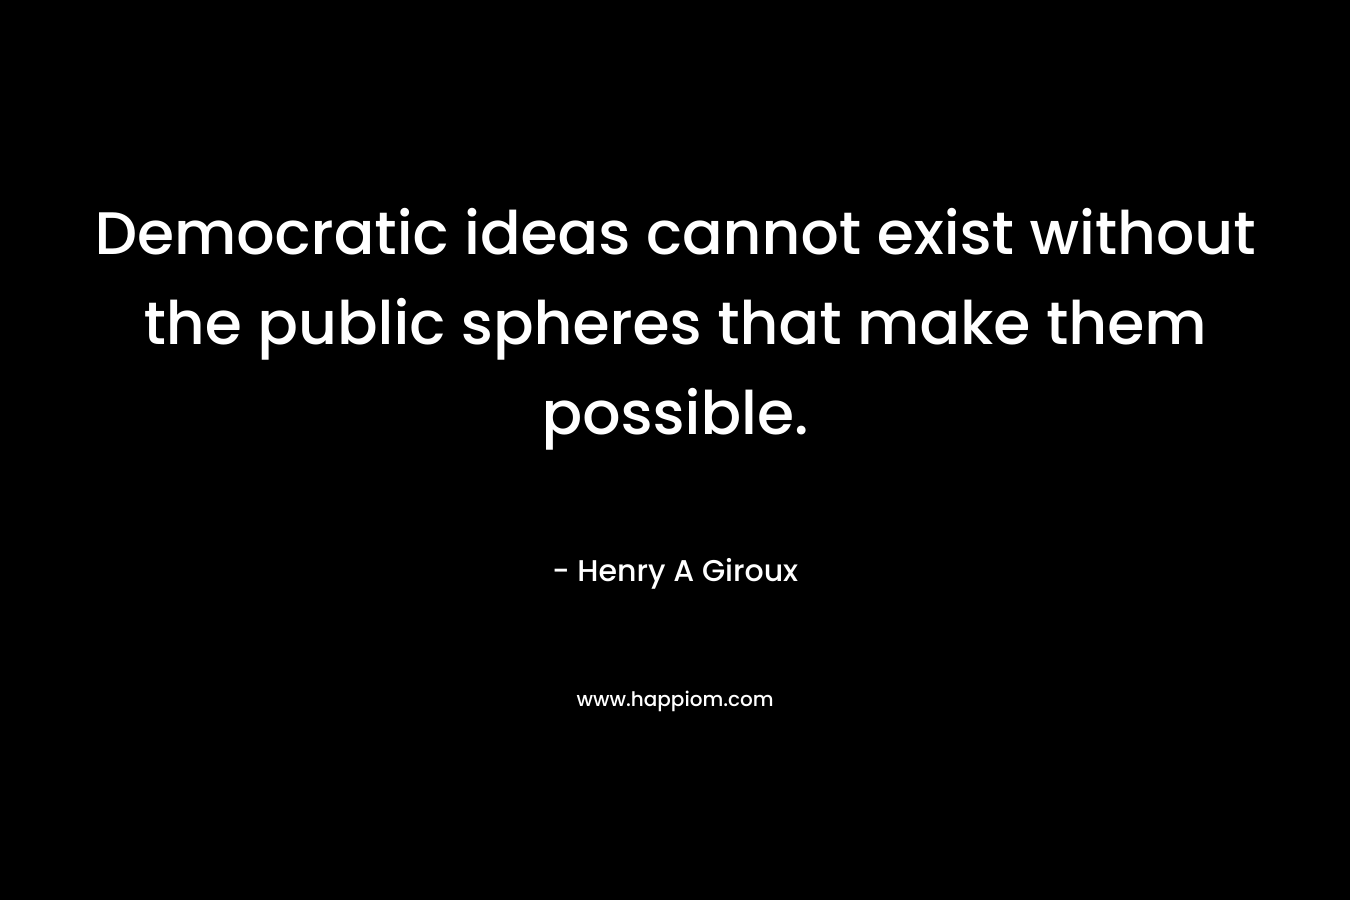 Democratic ideas cannot exist without the public spheres that make them possible. – Henry A Giroux